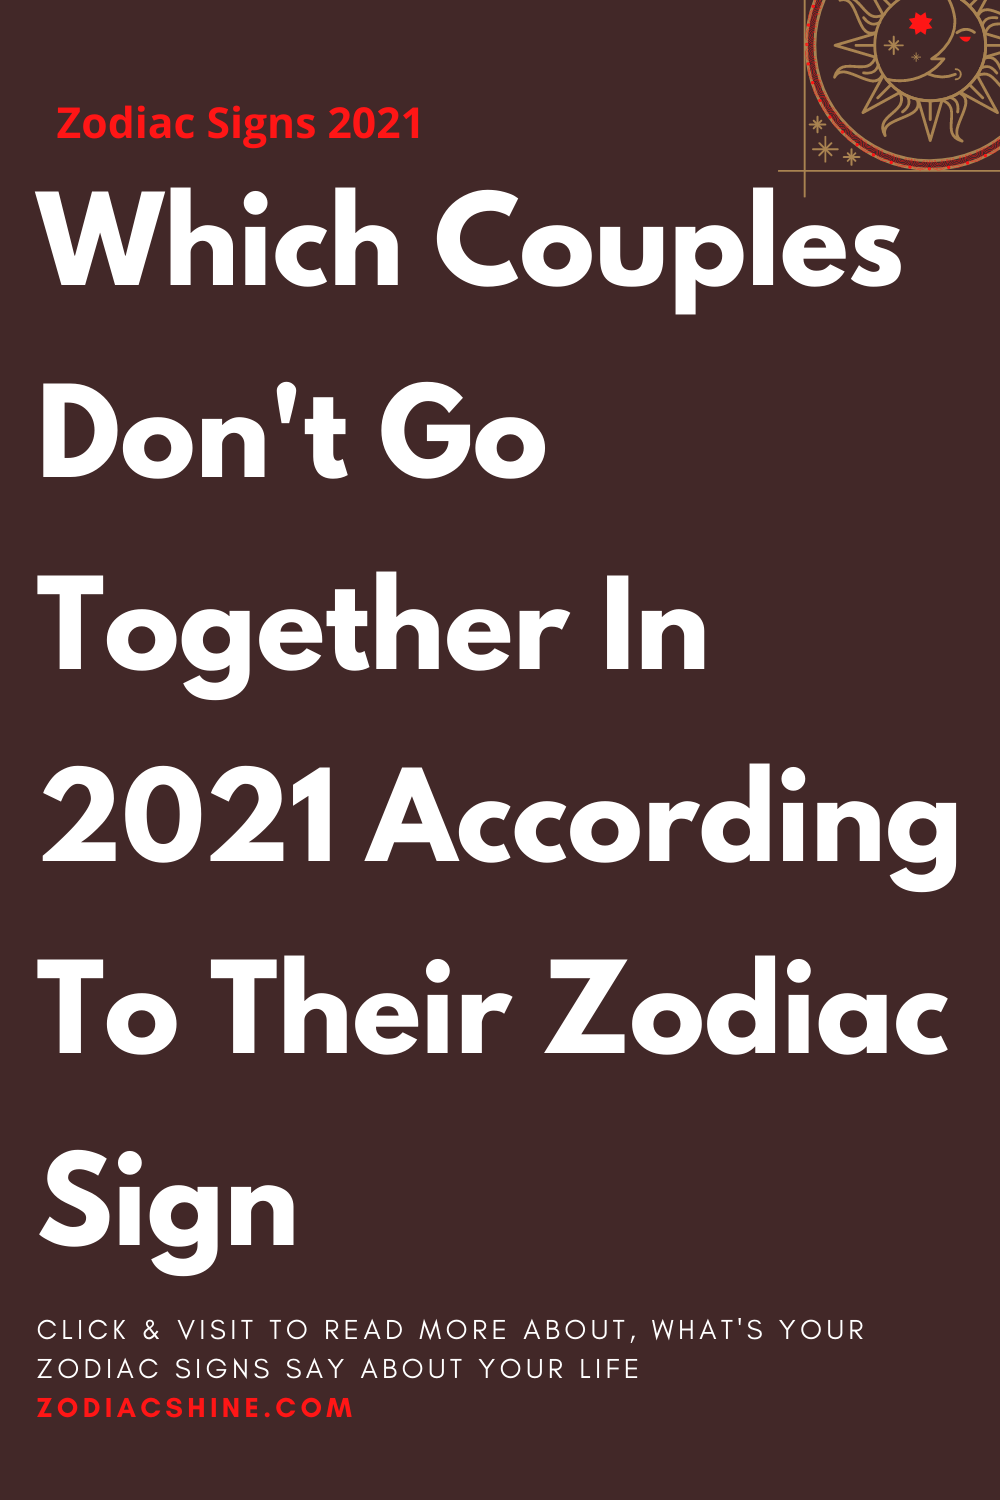 Which Couples Don't Go Together In 2021 According To Their Zodiac Sign